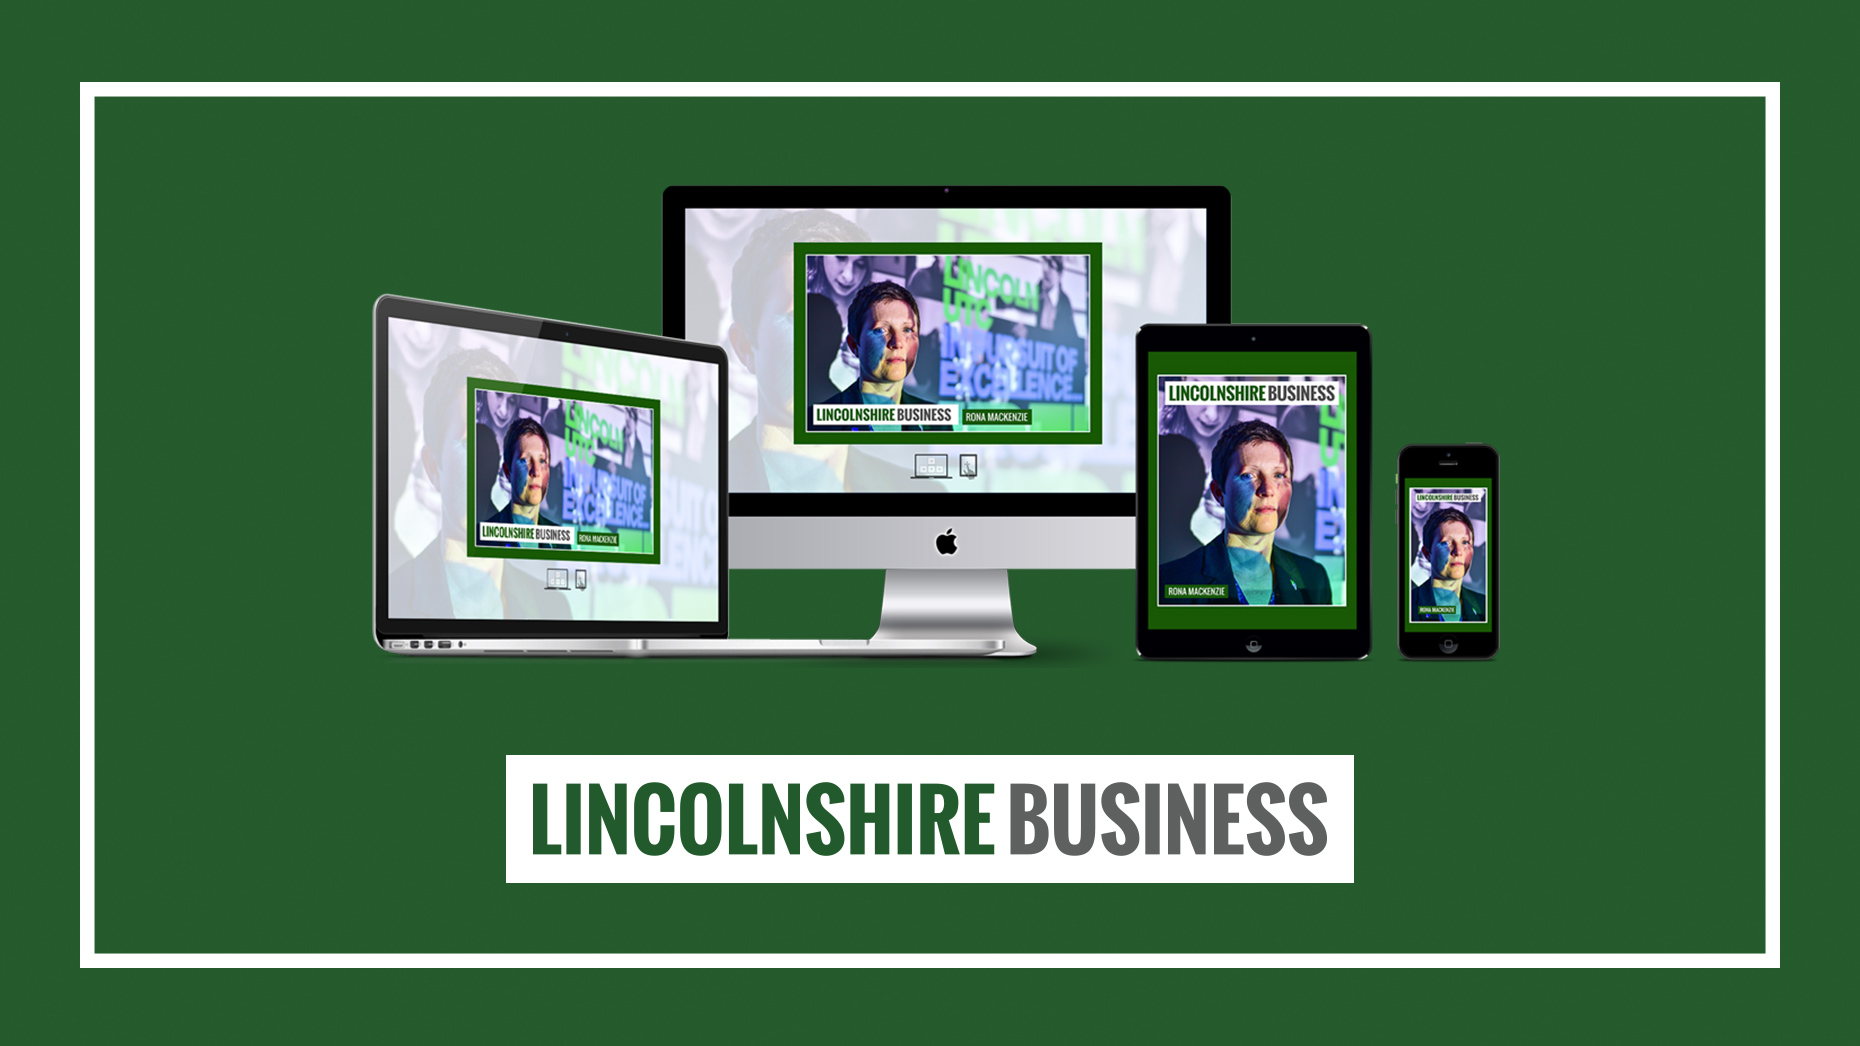 Issue 20 of Lincolnshire Business magazine is now available to read at lincsbusiness.co.